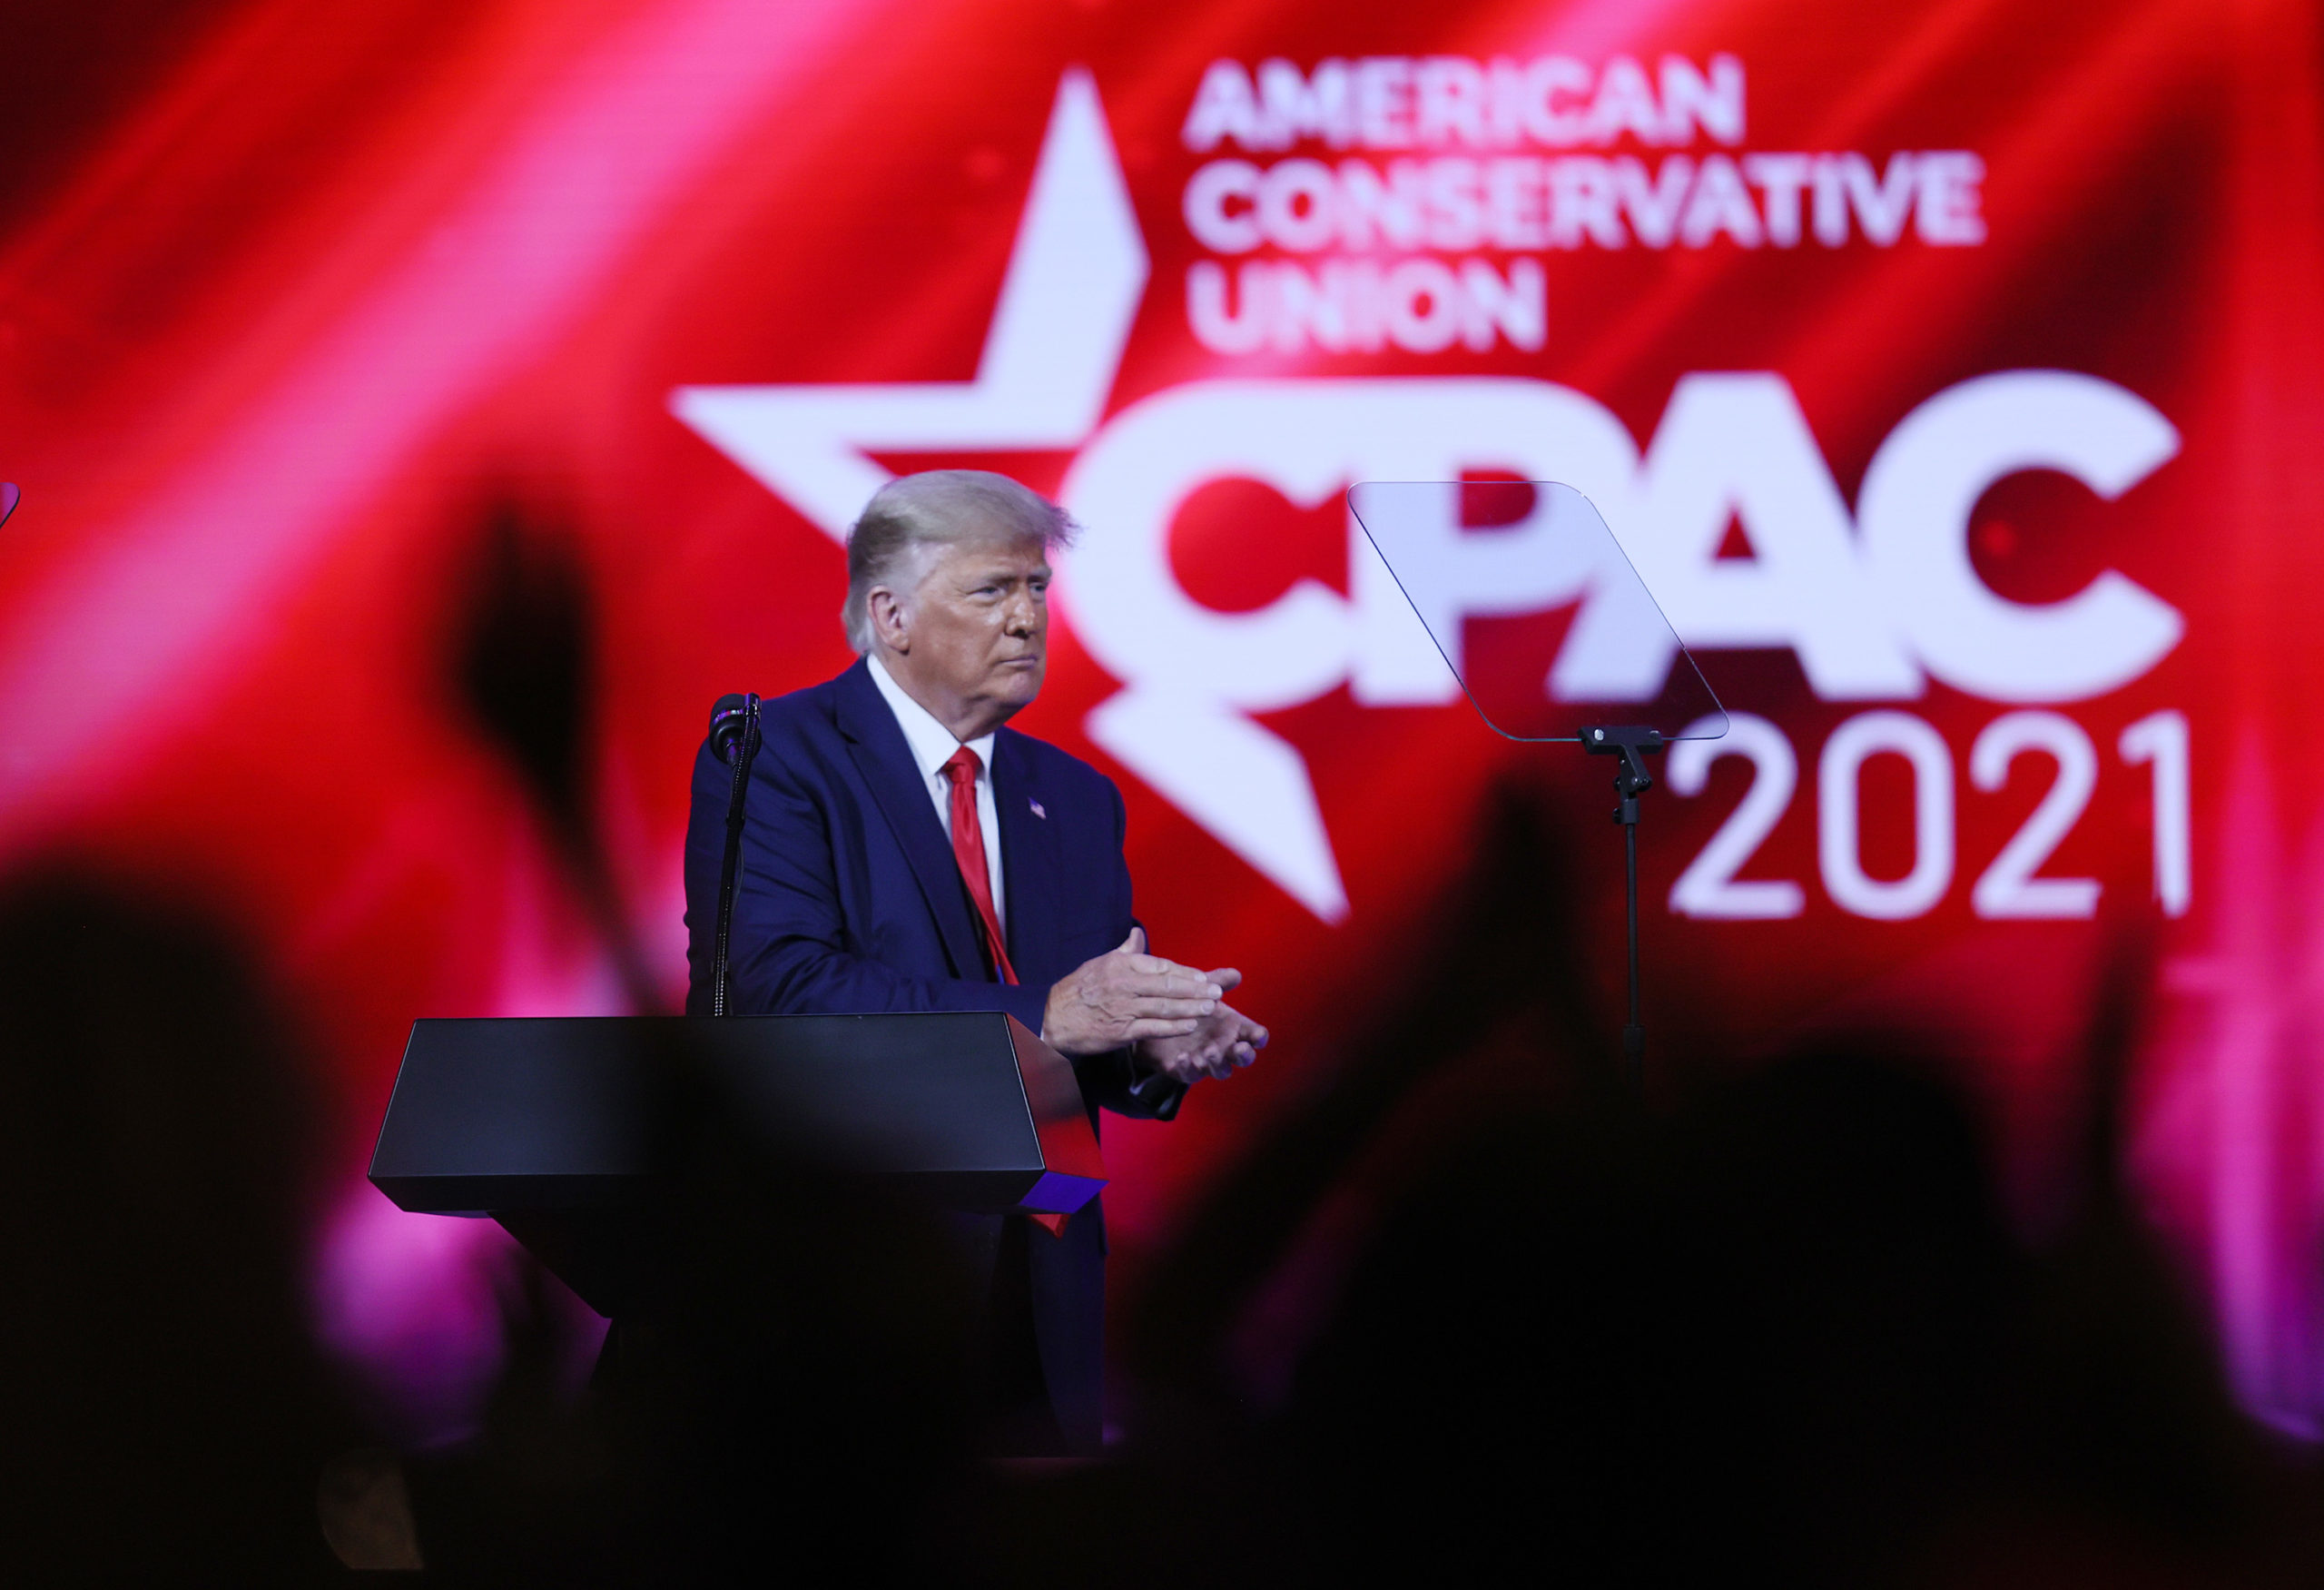 ORLANDO, FLORIDA - FEBRUARY 28: Former U.S. President Donald Trump addresses the Conservative Political Action Conference (CPAC) held in the Hyatt Regency on February 28, 2021 in Orlando, Florida. Begun in 1974, CPAC brings together conservative organizations, activists, and world leaders to discuss issues important to them. (Photo by Joe Raedle/Getty Images)